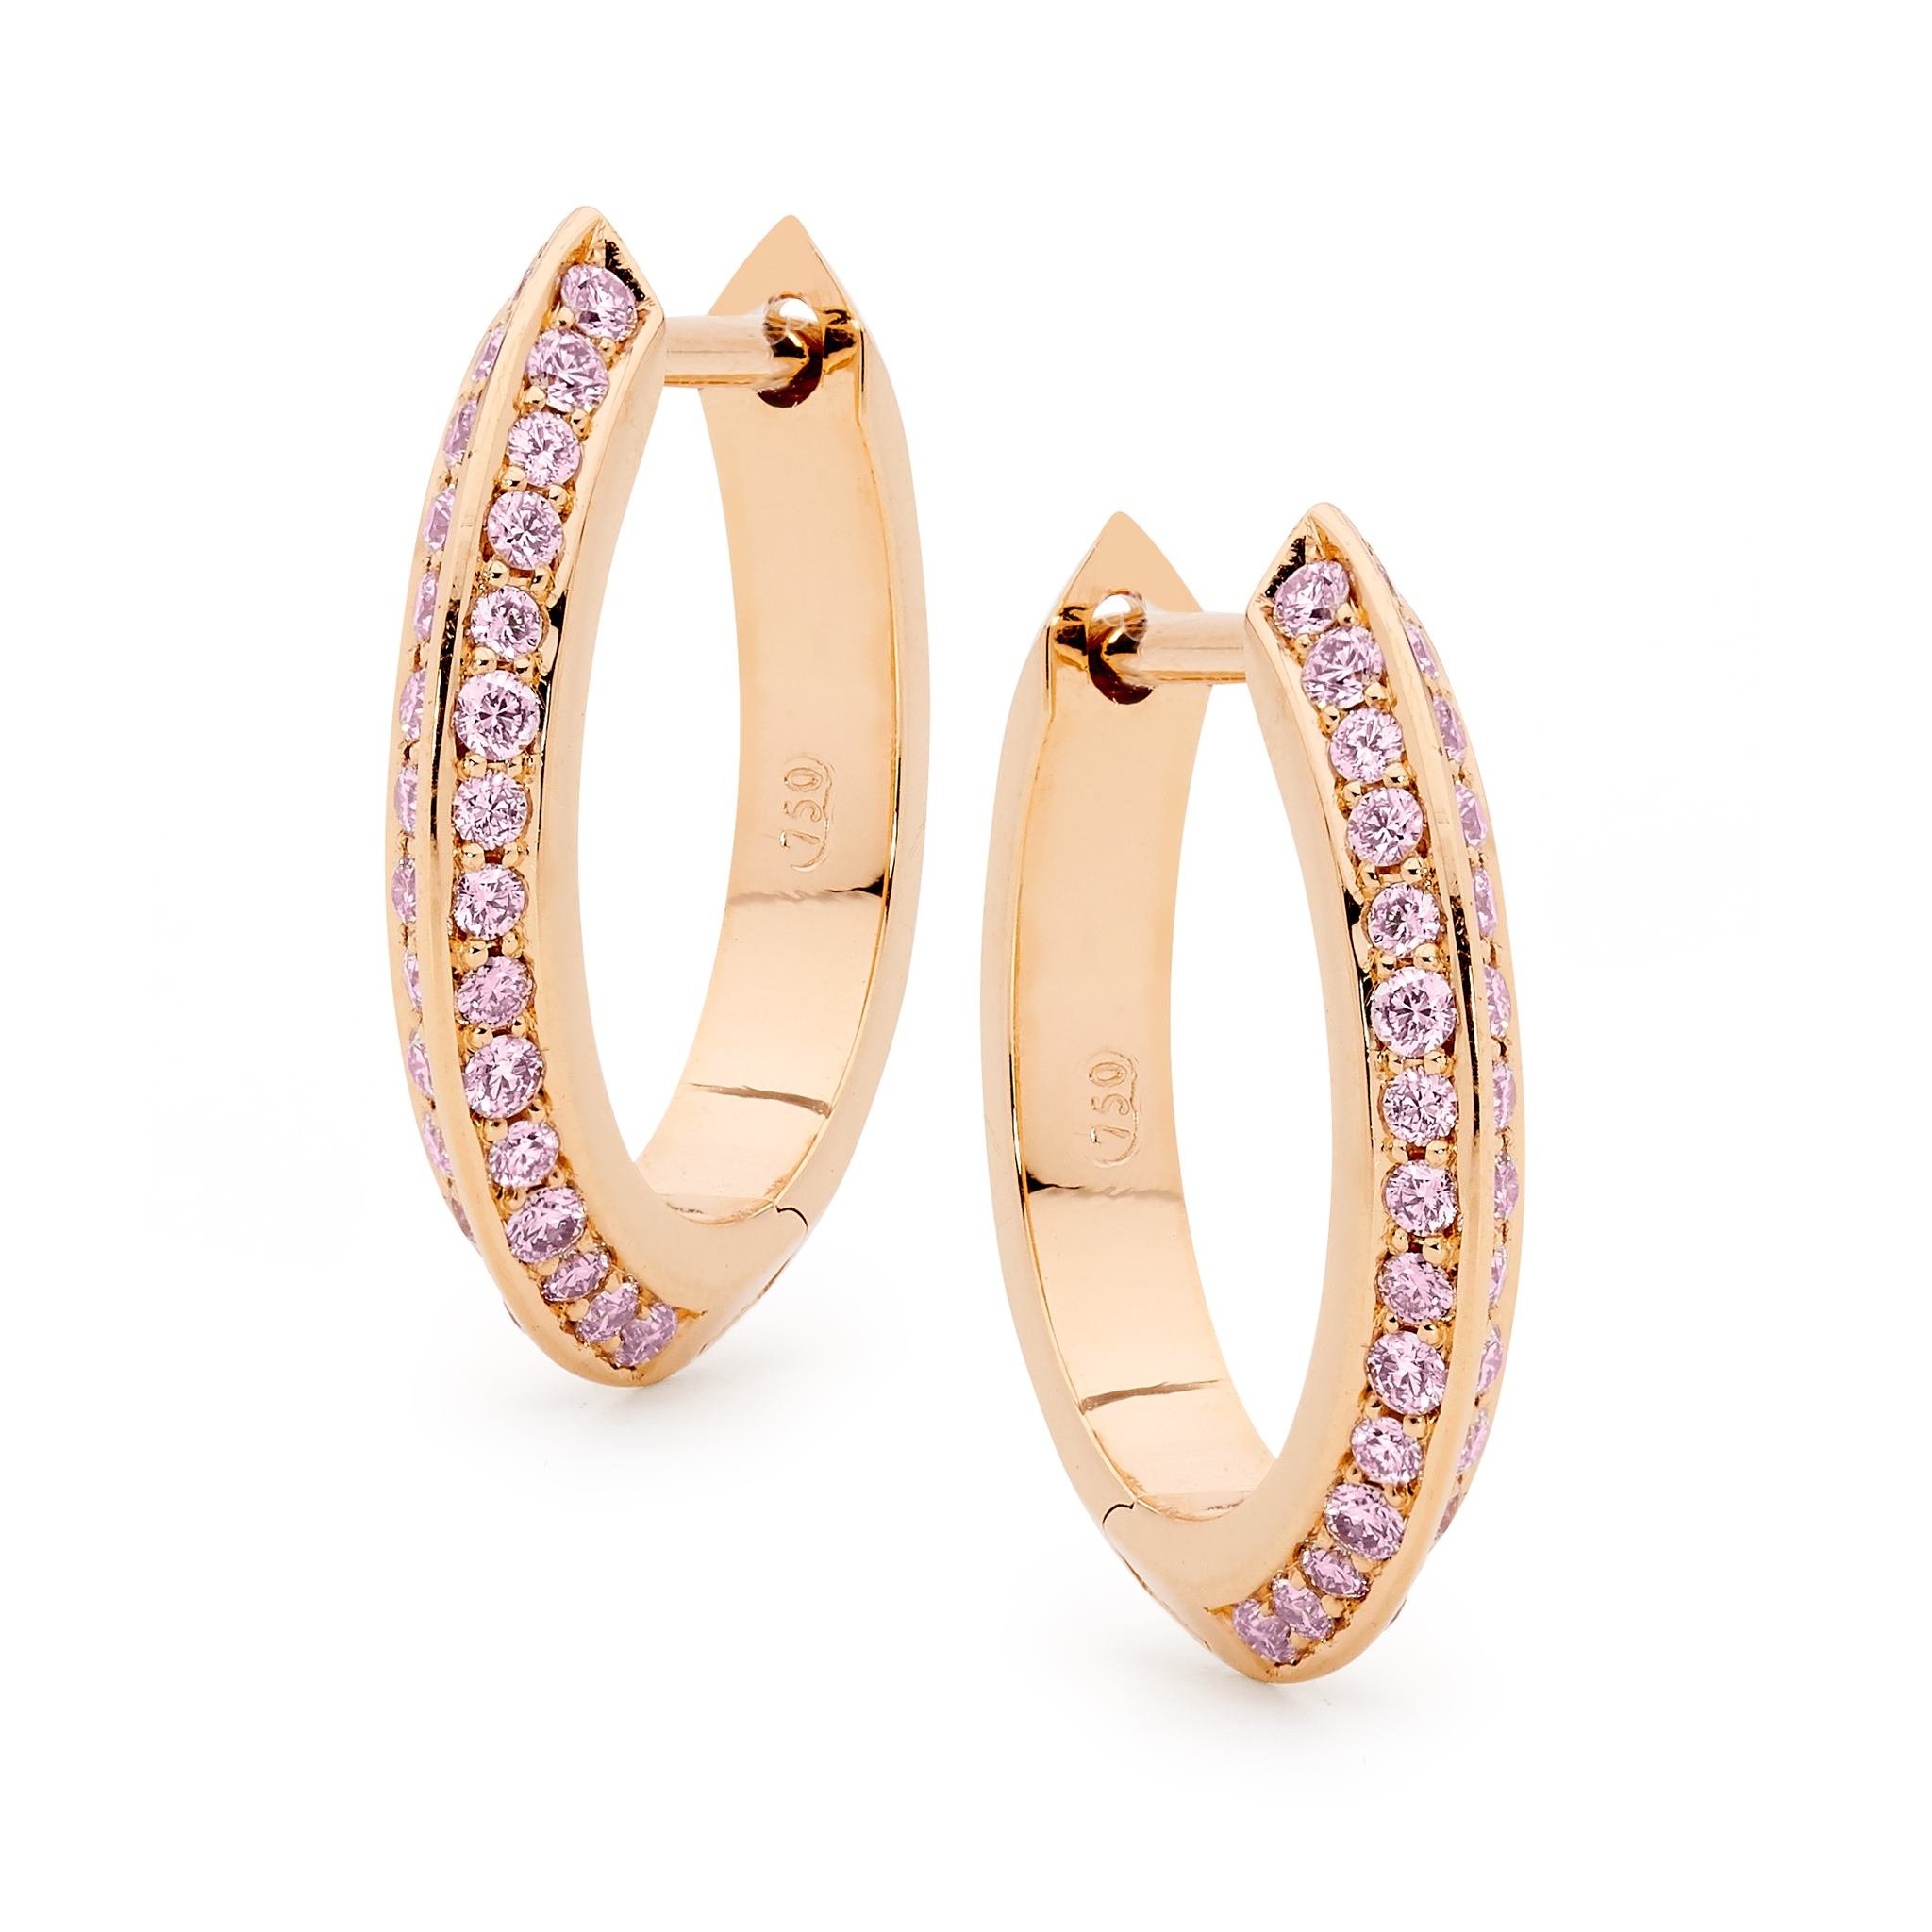 Twice the charm, double the elegance!  Introducing our knife-edge style earrings, crafted for those who appreciate versatility and style. Choose from the stunning two-tone design, pairing 18K rose gold with vibrant pink diamonds from the Argyle mine 